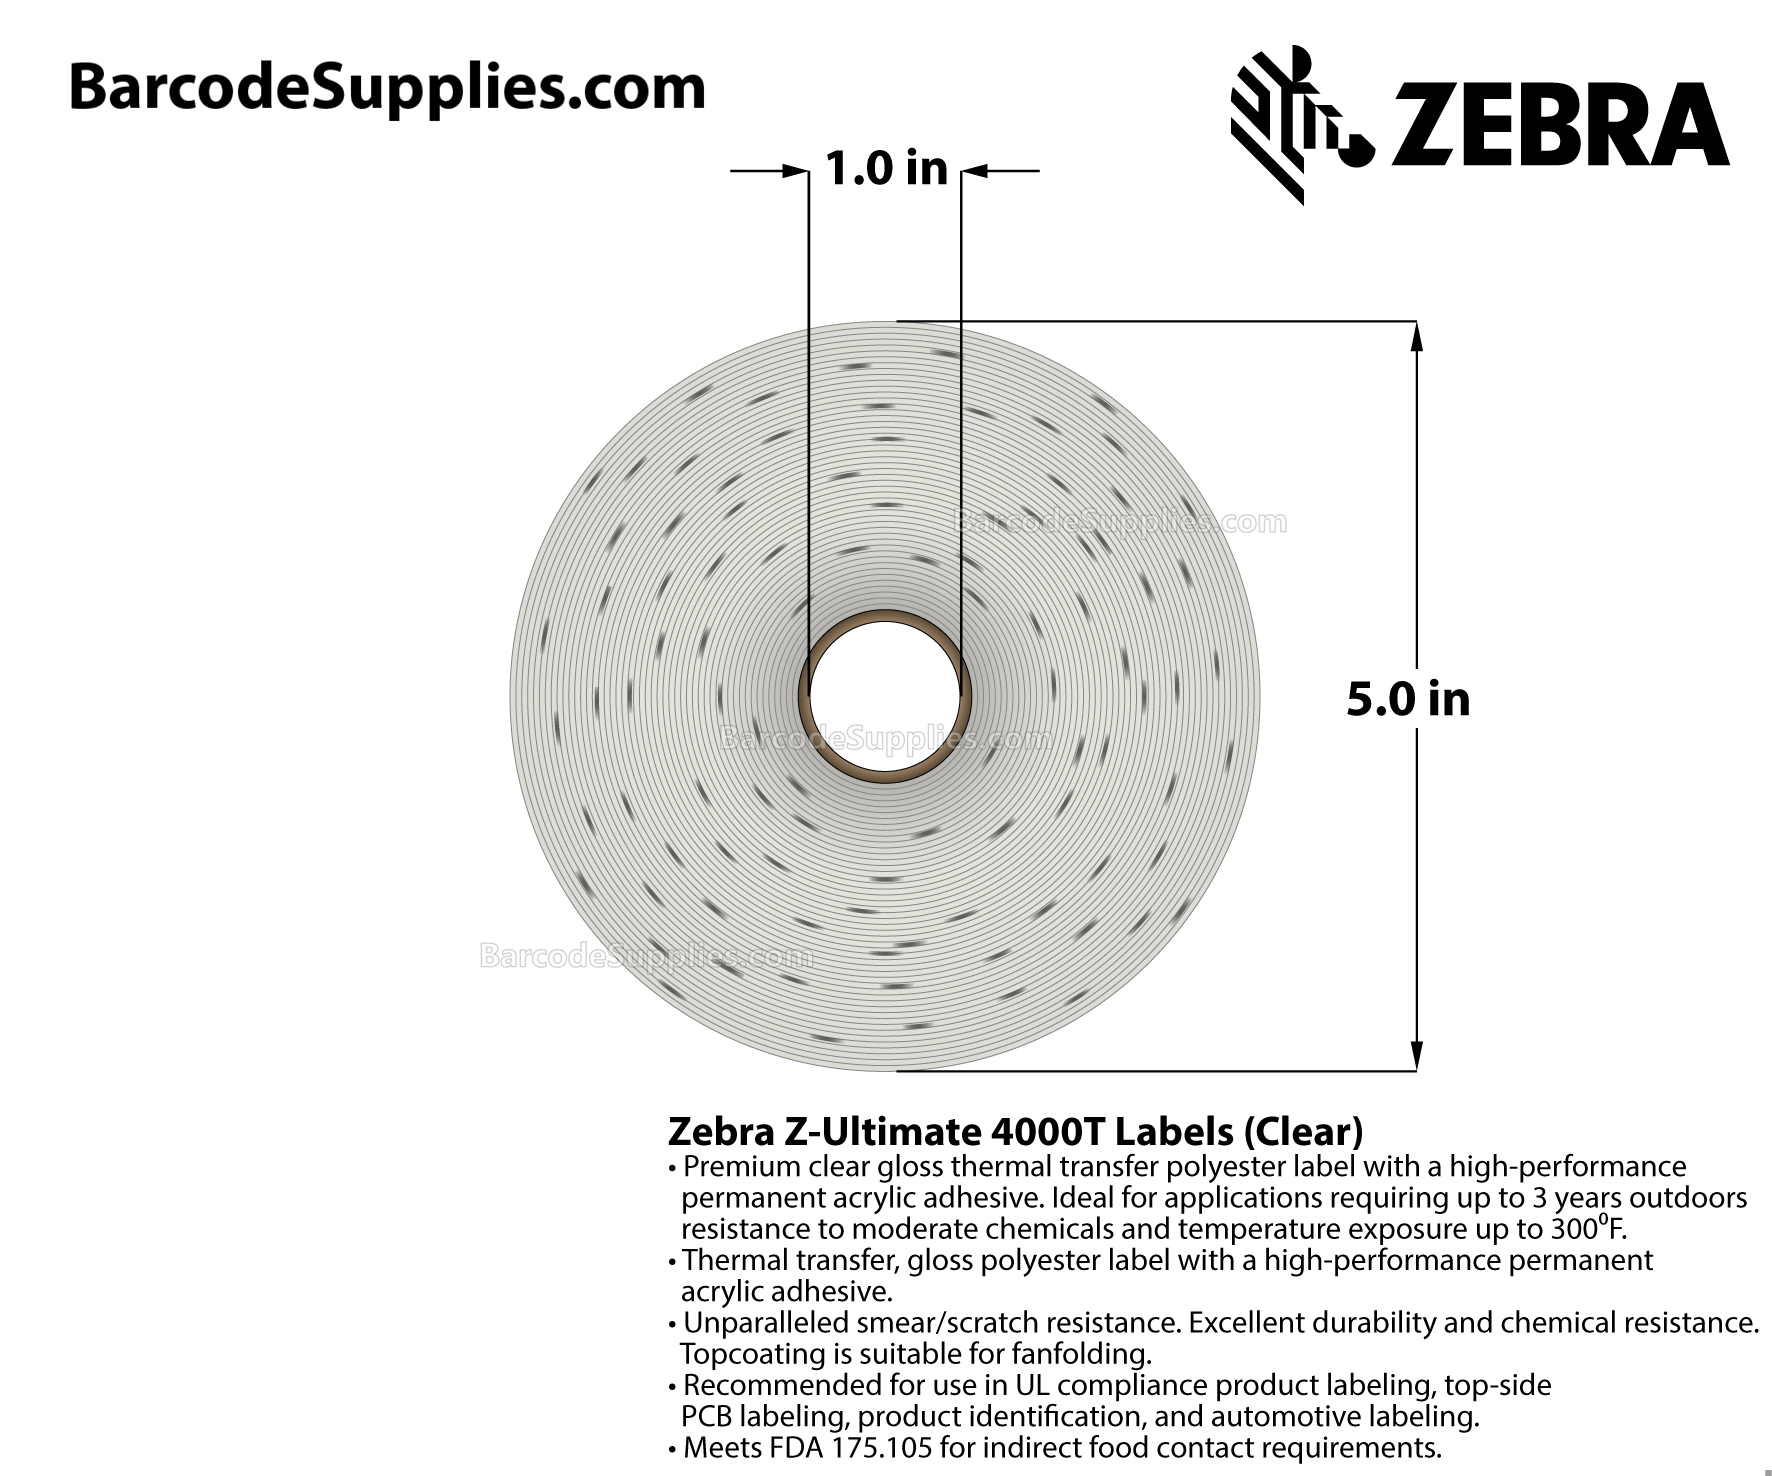 2 x 1 Thermal Transfer Clear Z-Ultimate 4000T Clear Labels With Permanent Adhesive - Black mark sensing - Black Mark - 1500 Labels Per Roll - Carton Of 1 Rolls - 1500 Labels Total - MPN: 10023044